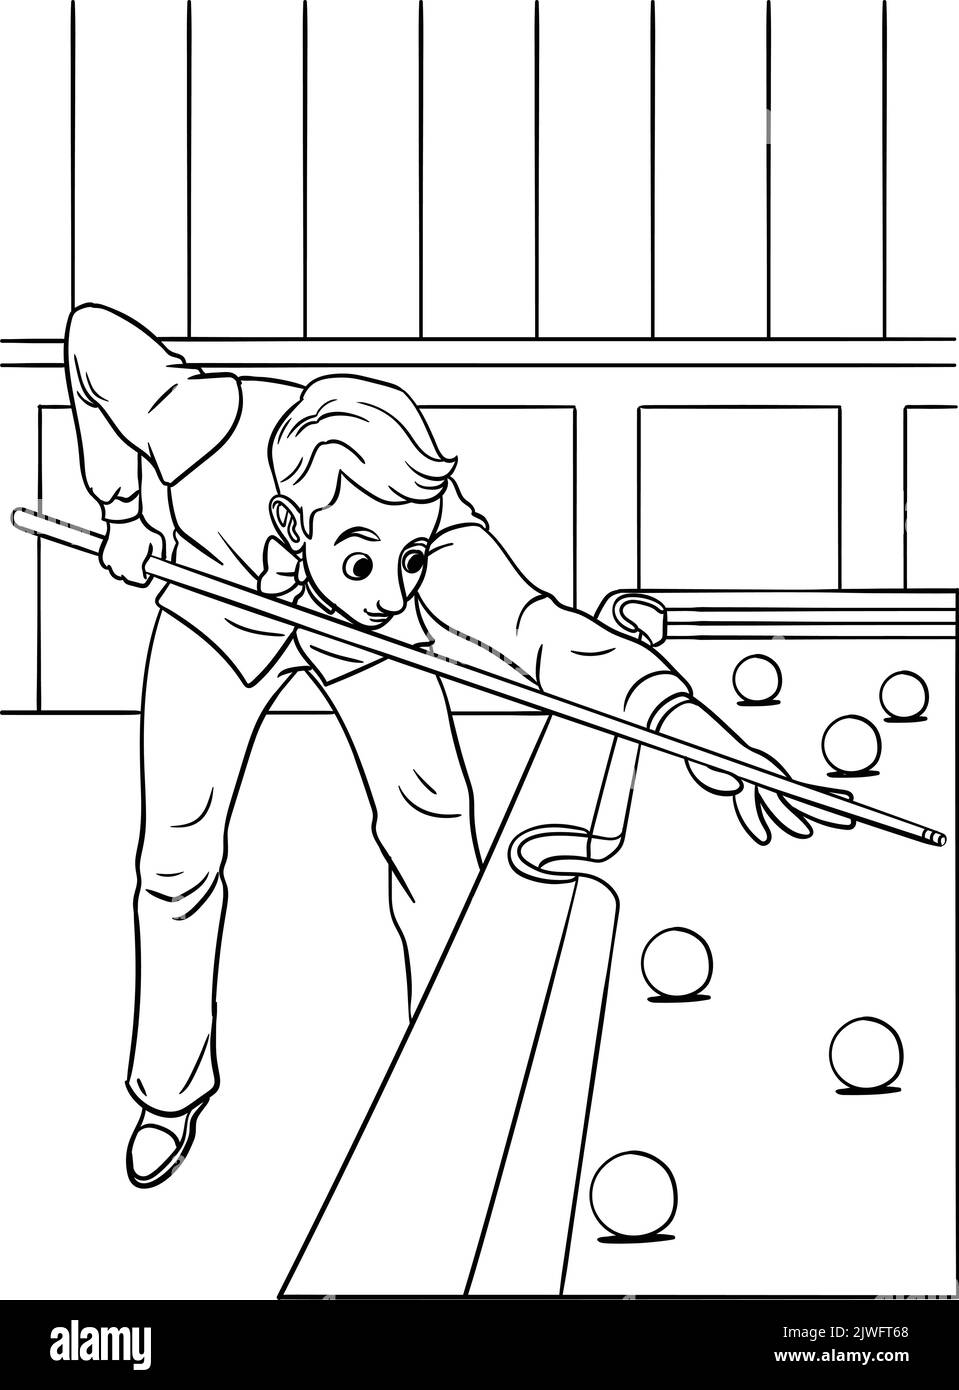 Snooker Coloring Page for Kids Stock Vector